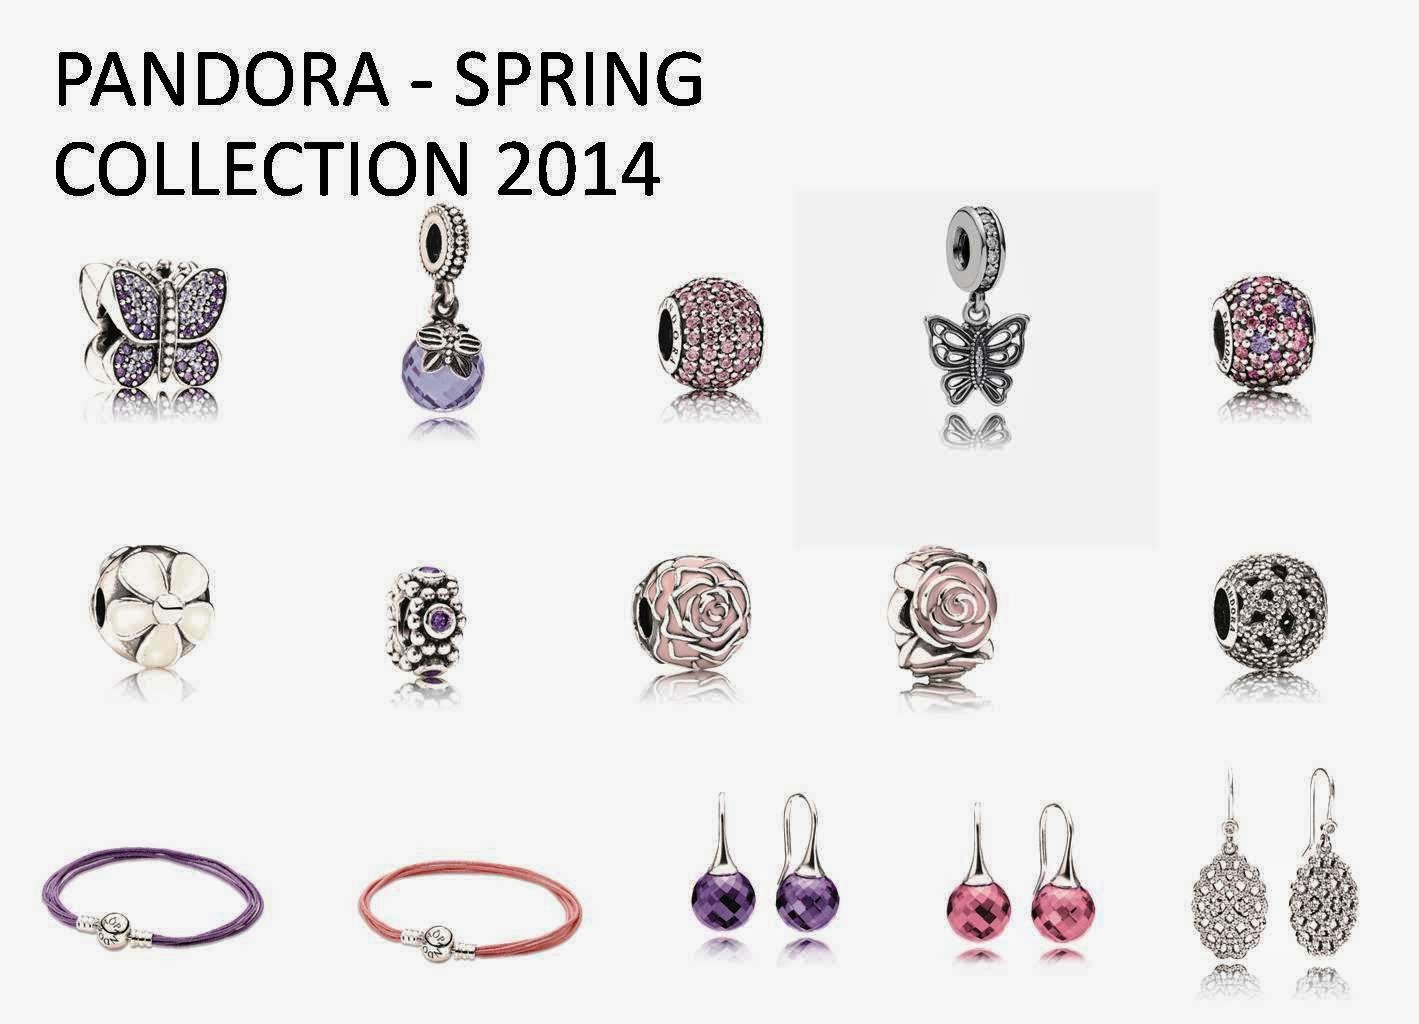 Pandora Spring Collection 2014, pandora charms, pandora spring collection, Soft Spring Flora, Delicate Butterflies, Sparkling Butterfly, Flora Brilliance, pink mix pave ball, home sweet home, my sweet pet charm